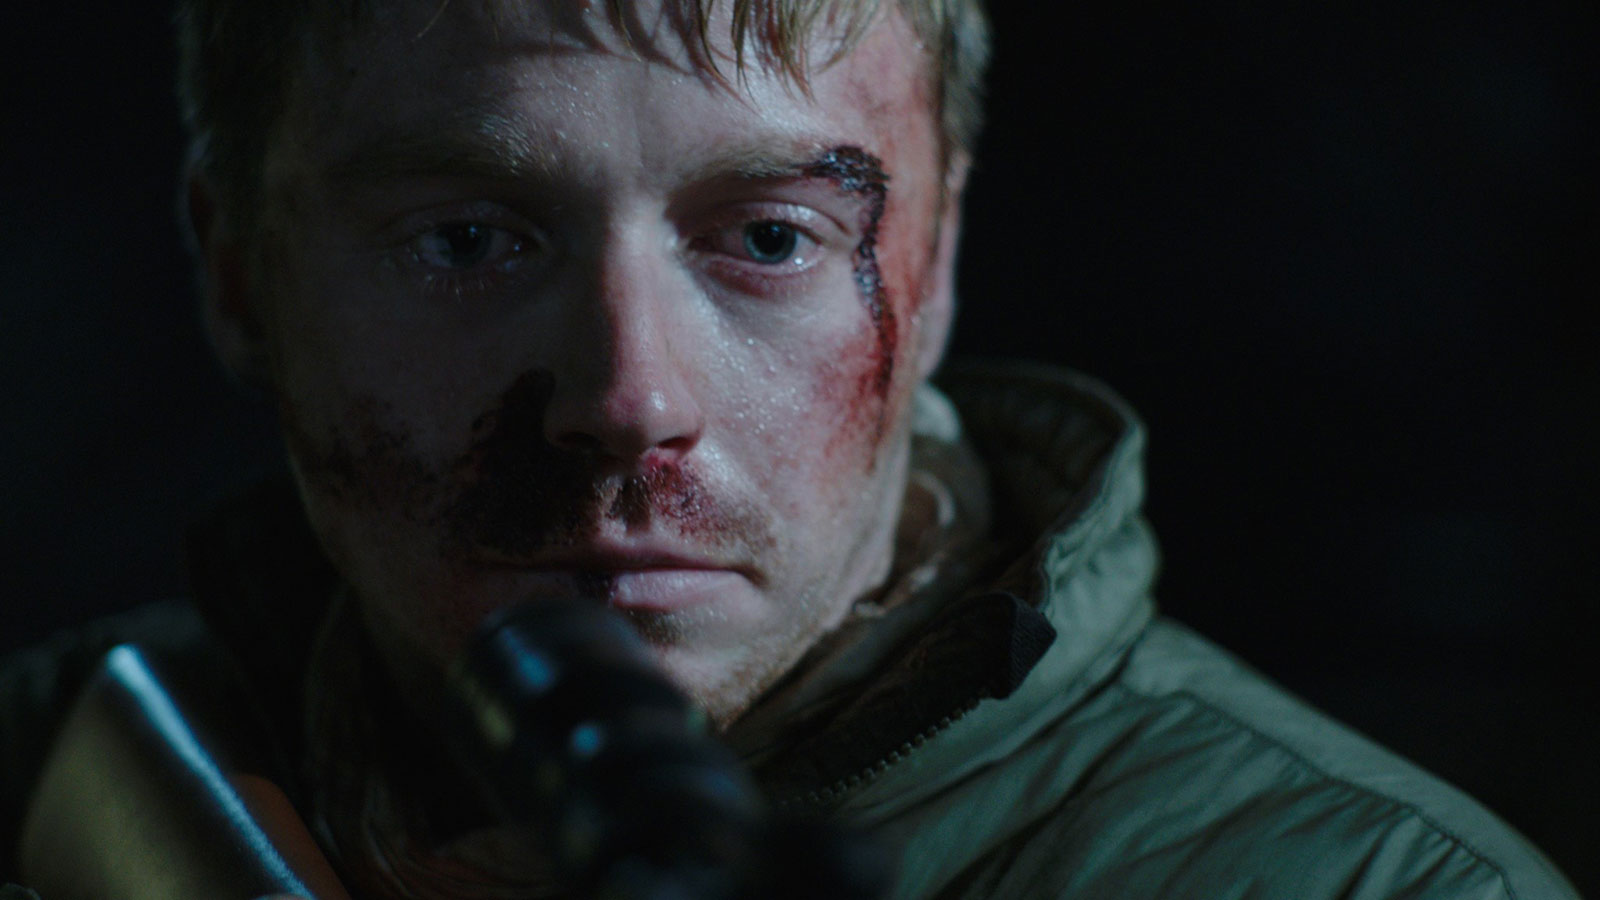 Still image from Calibre showing a man with cuts on his face holding a rifle